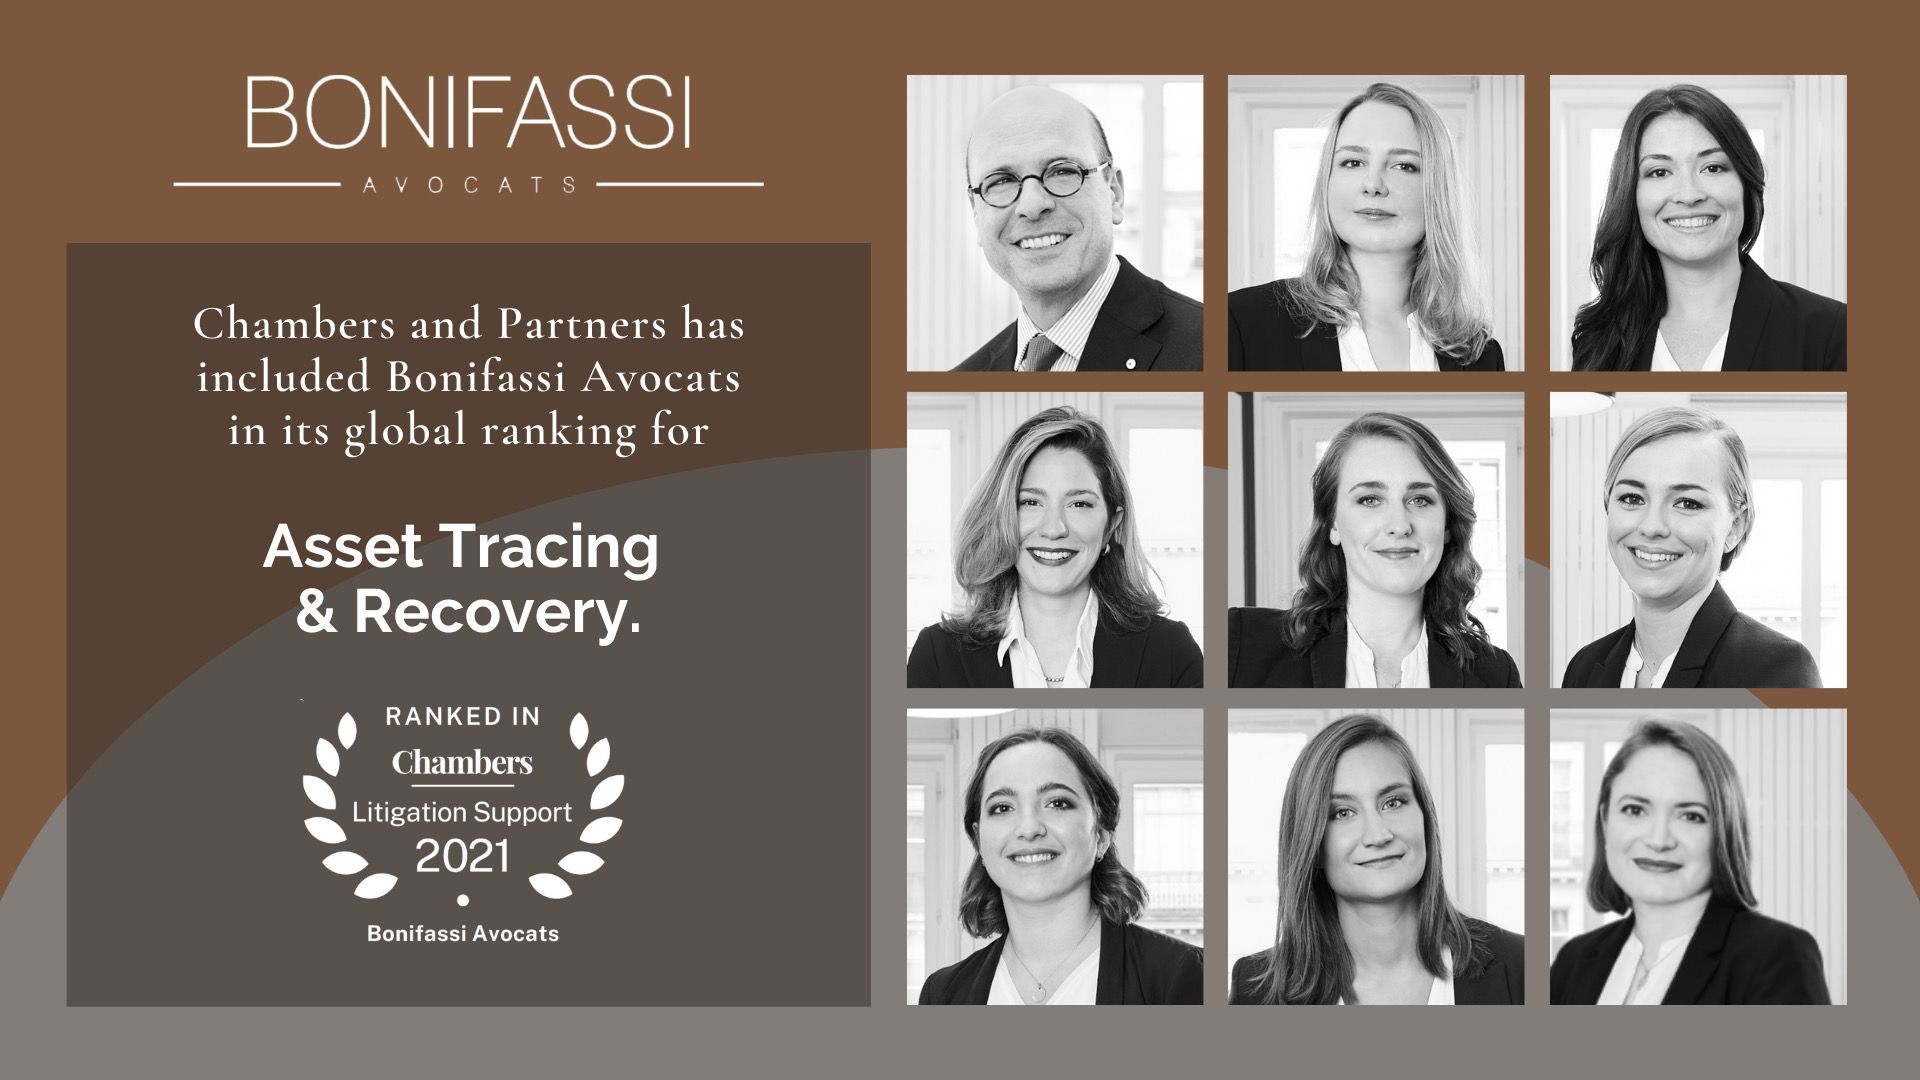 Chambers and Partners’ ranks Bonifassi Avocats in Asset Tracing & Recovery